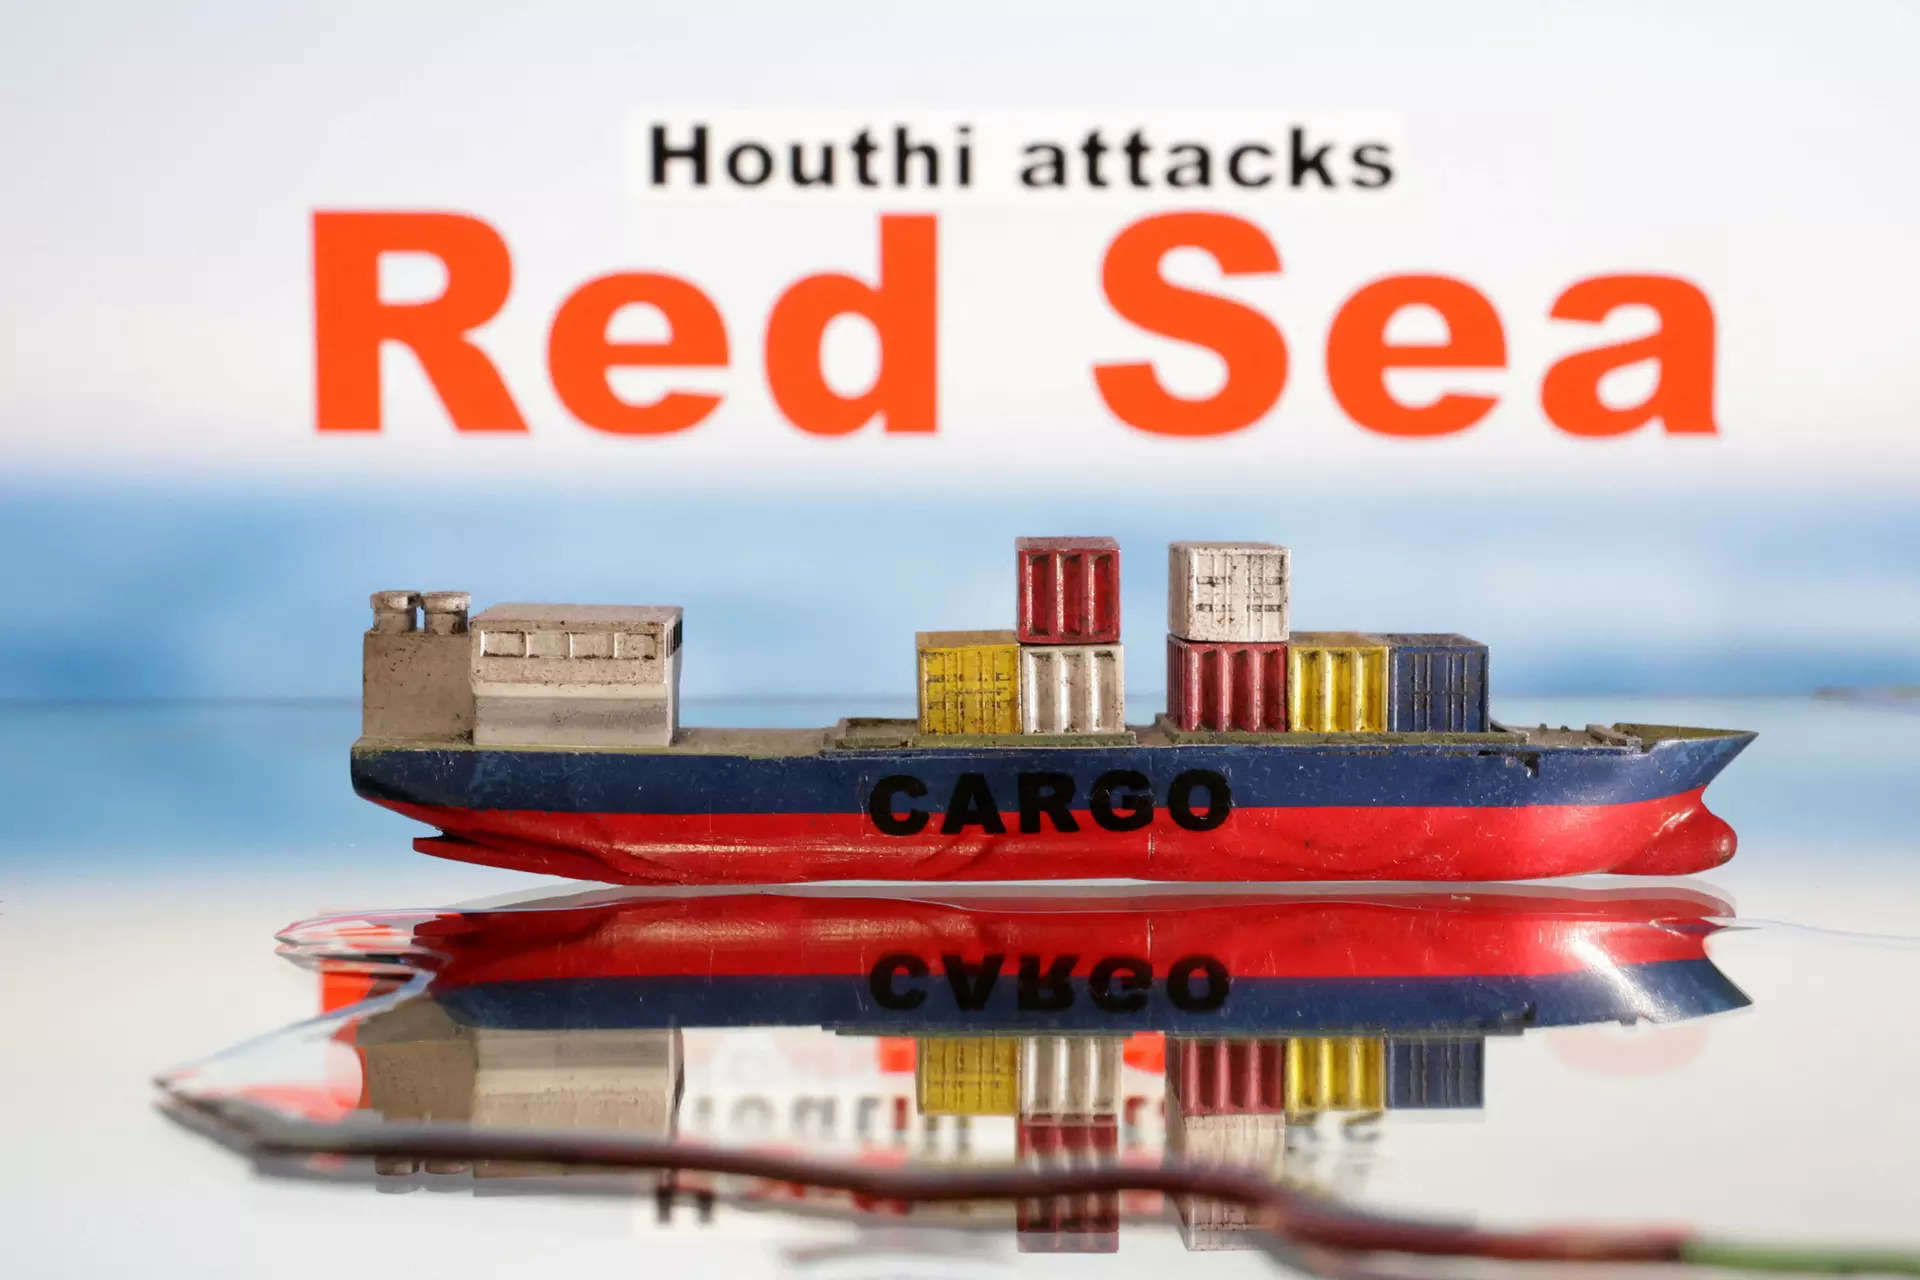 Container rates skyrocket amid Red Sea crisis; spike to $5400 from $1500  amid Houthi attacks, ET EnergyWorld